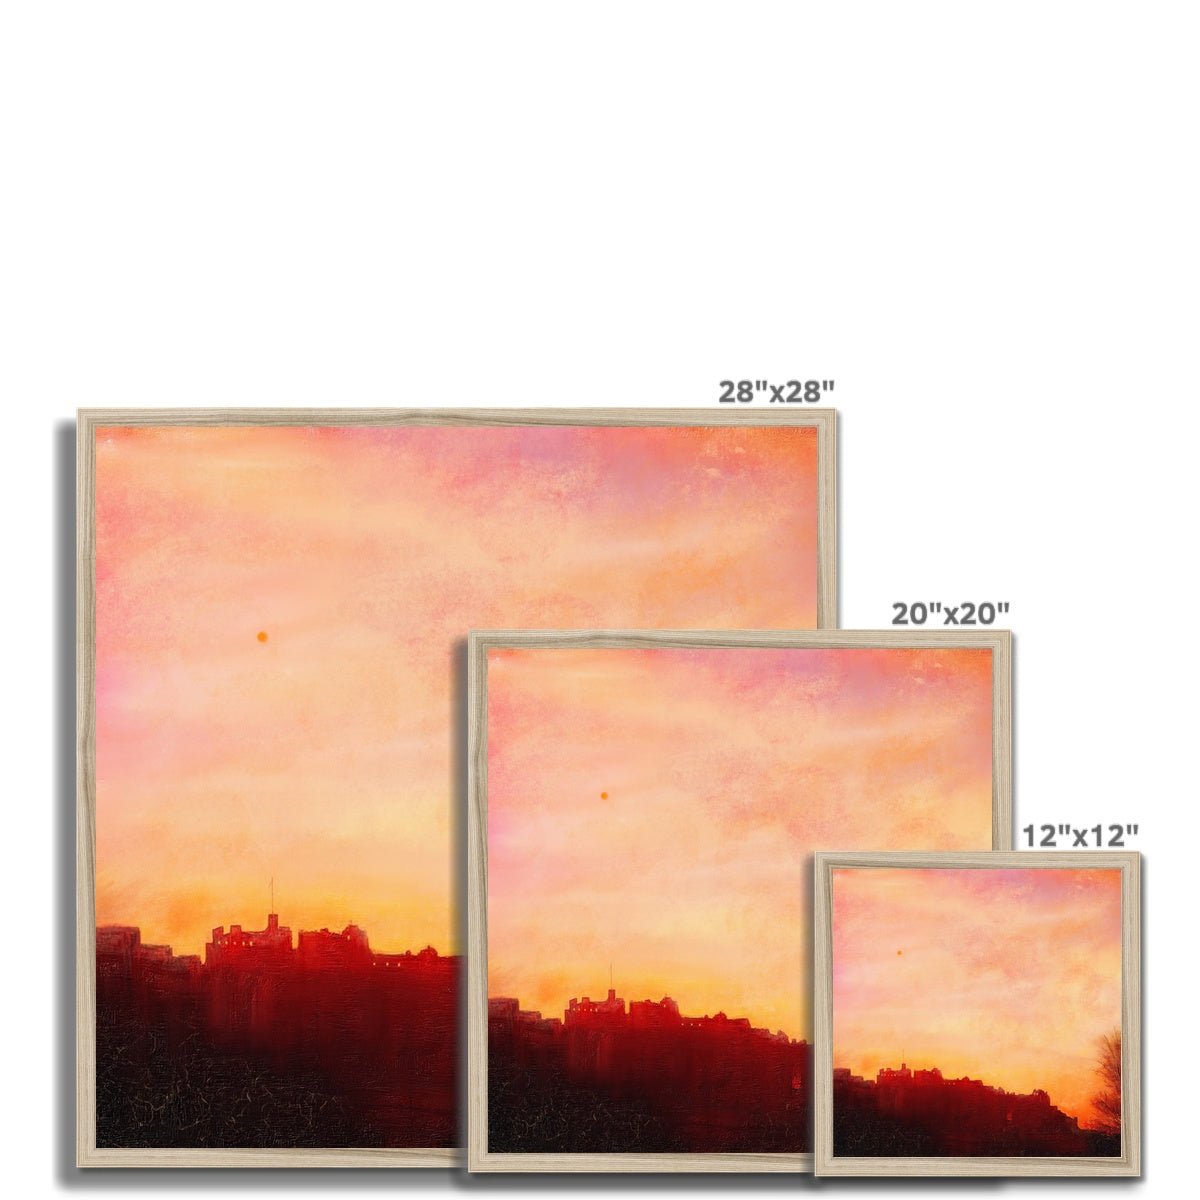 Edinburgh Castle Sunset Painting | Framed Prints From Scotland-Framed Prints-Historic & Iconic Scotland Art Gallery-Paintings, Prints, Homeware, Art Gifts From Scotland By Scottish Artist Kevin Hunter